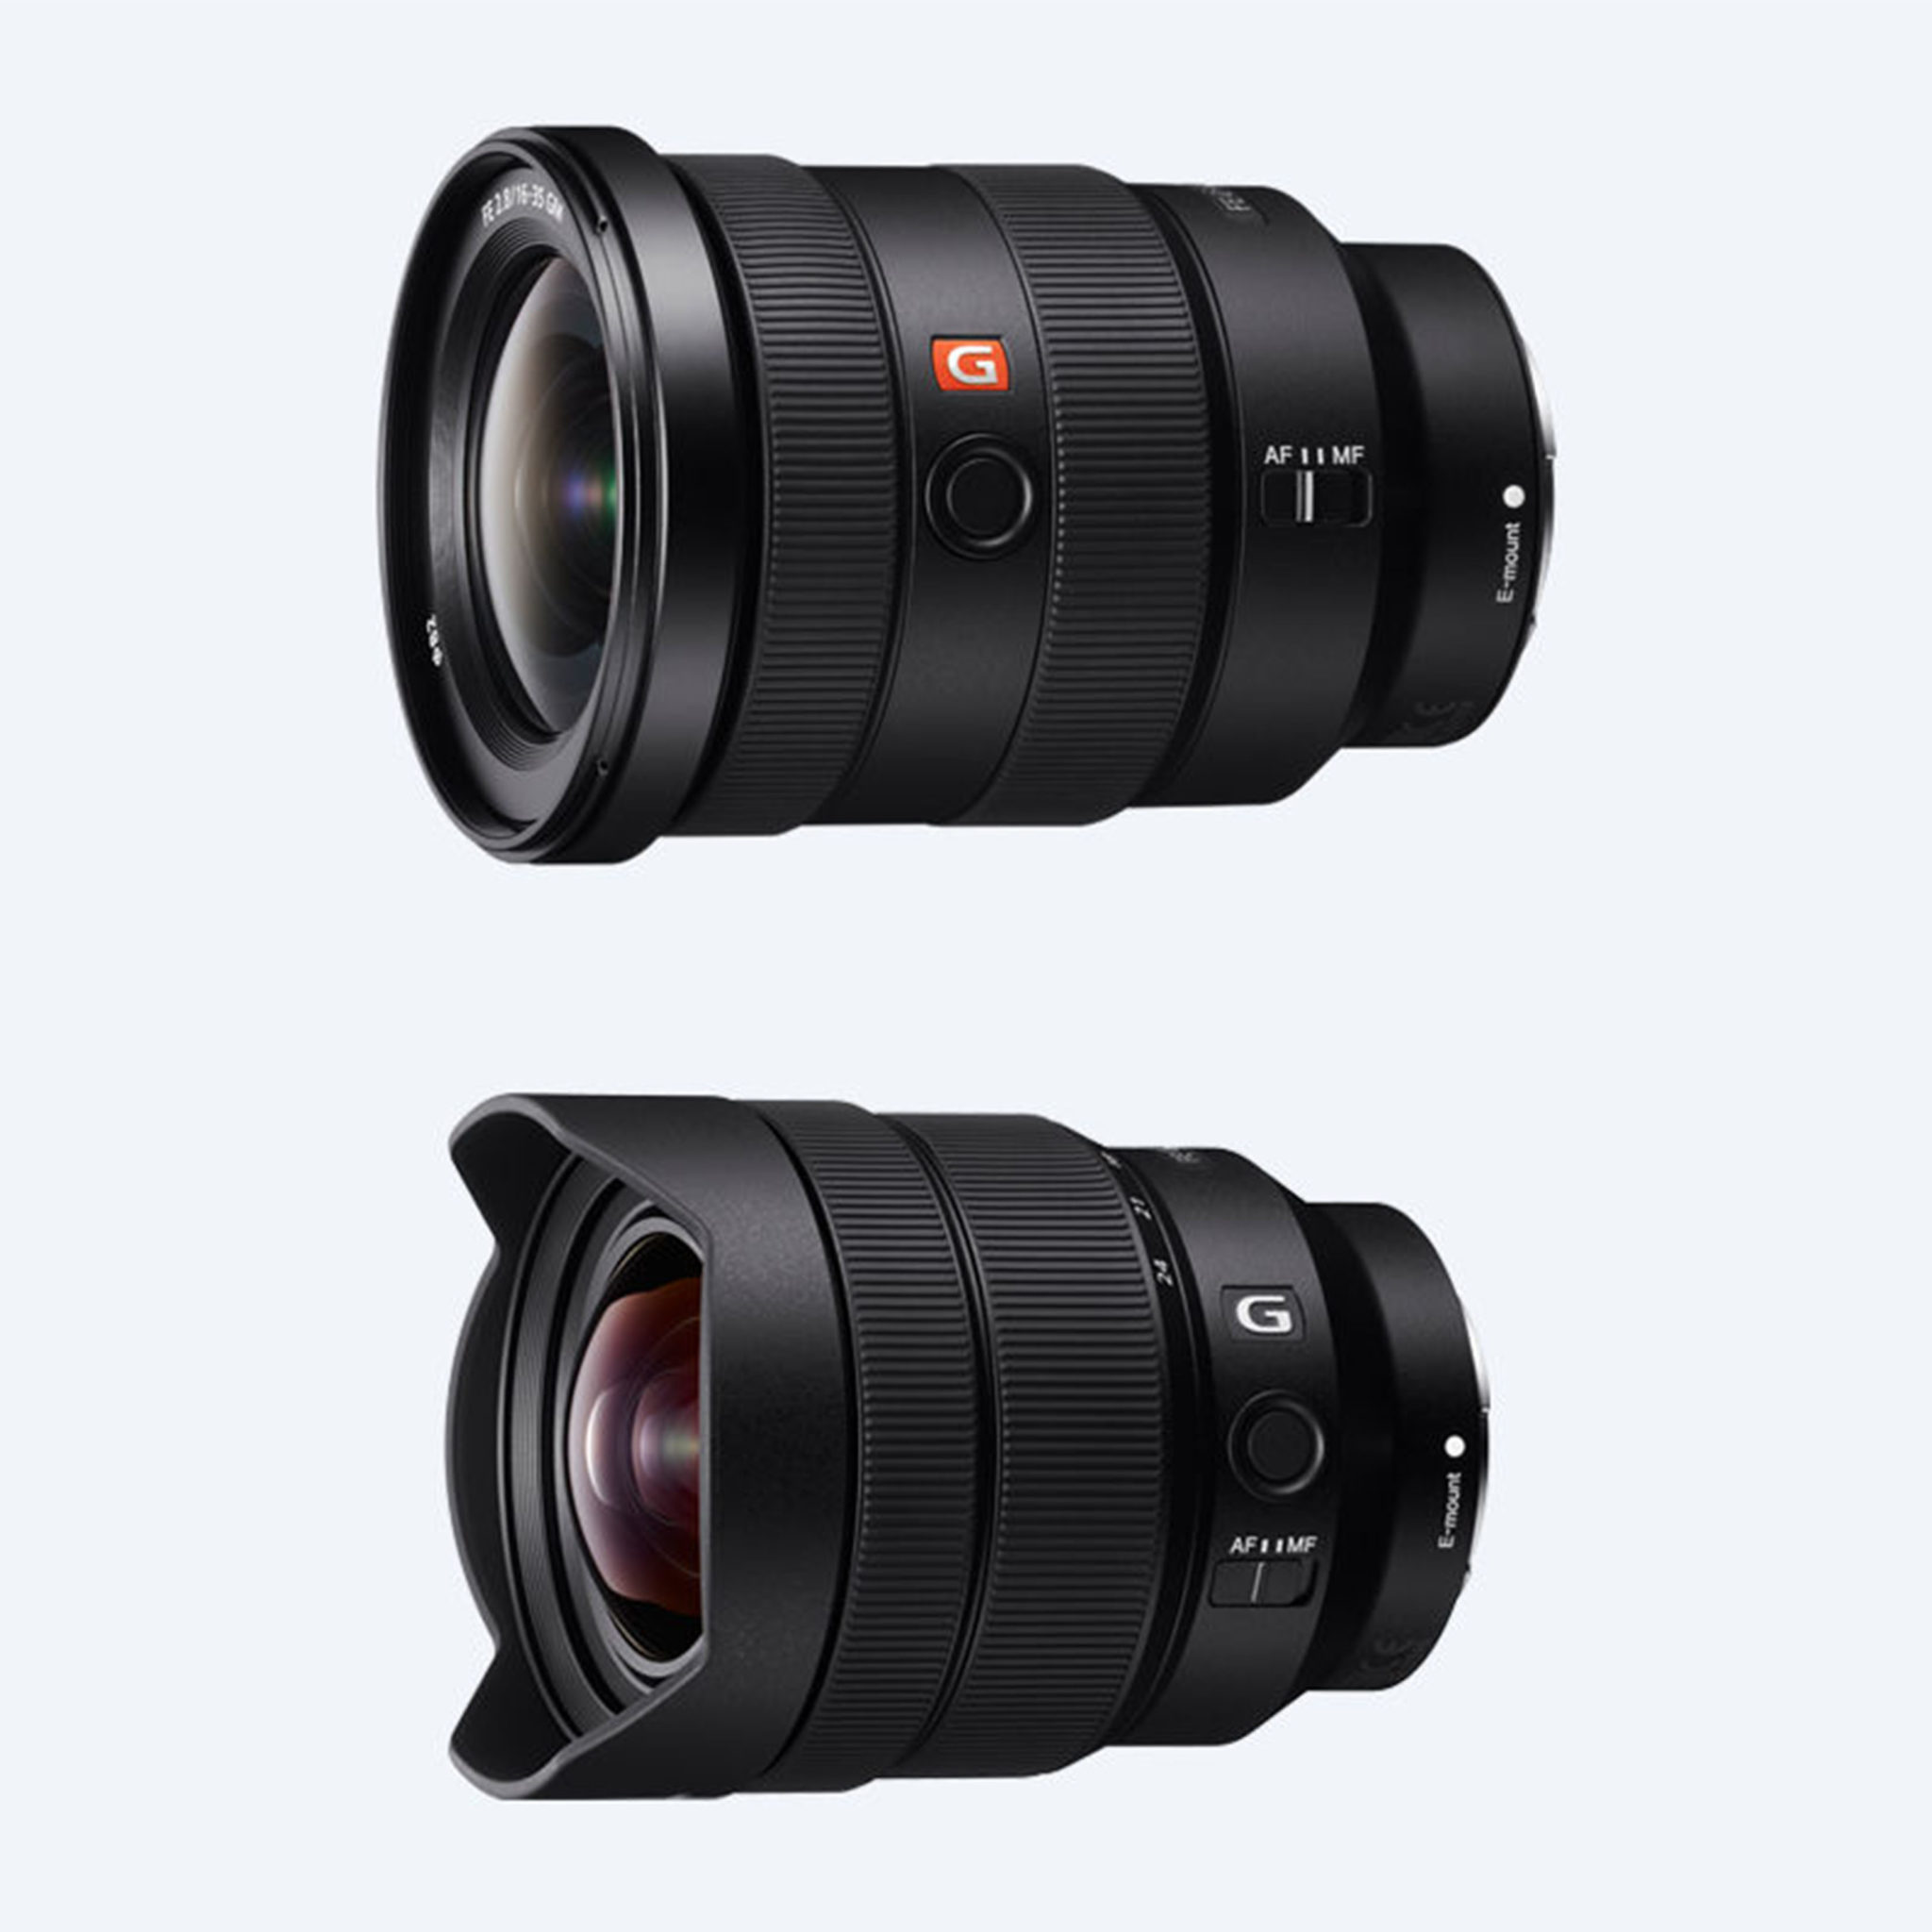 Photography news Sony announces two new wideangle lenses